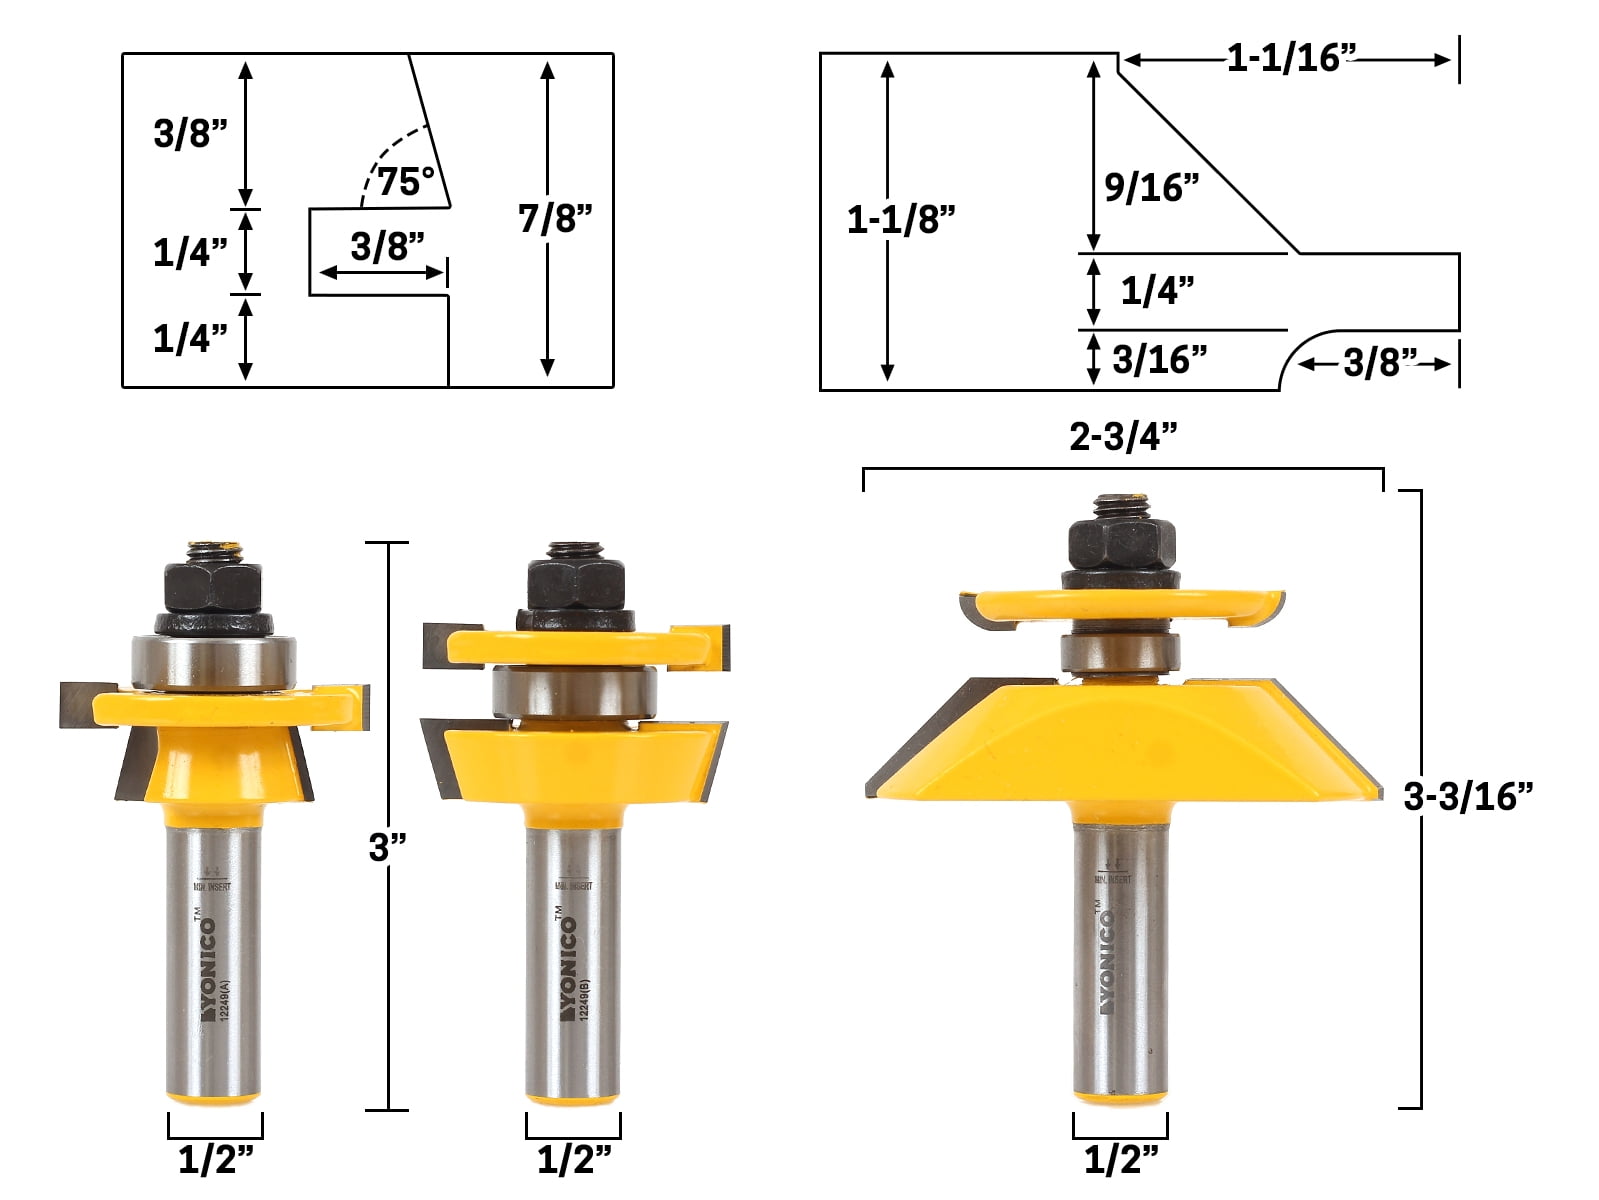 Bevel Stock Size Yonico 12247-2 Bit Rail and Stile Router Bit Set 3/4 to 7/8-1/2 Shank